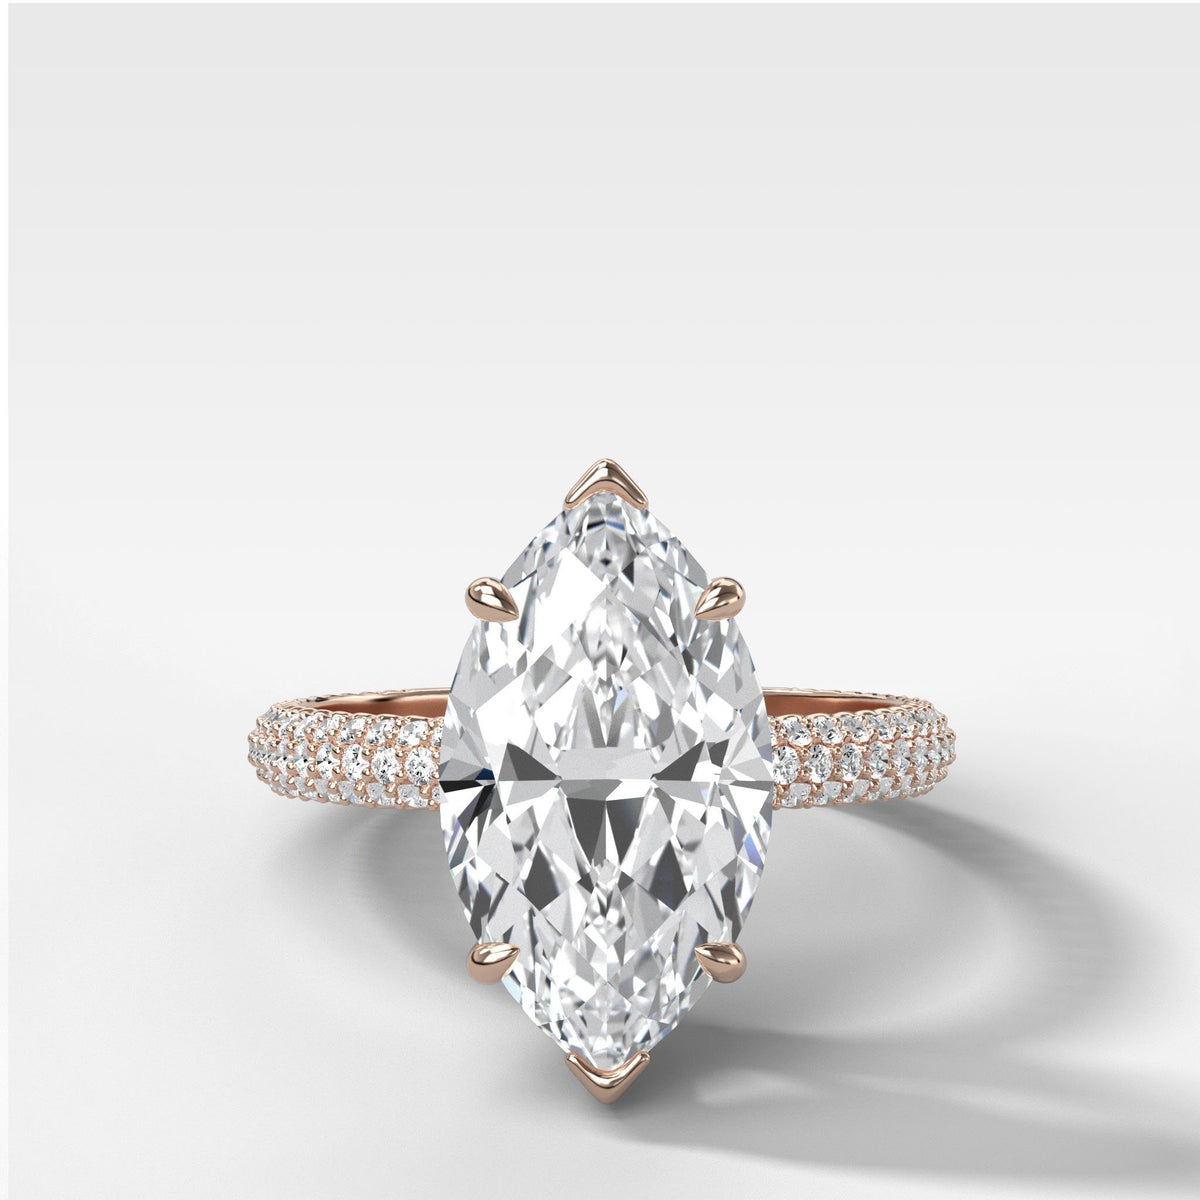 Triple Row Pav≈Ω Engagement Ring With Marquise Cut by Good Stone in Rose Gold